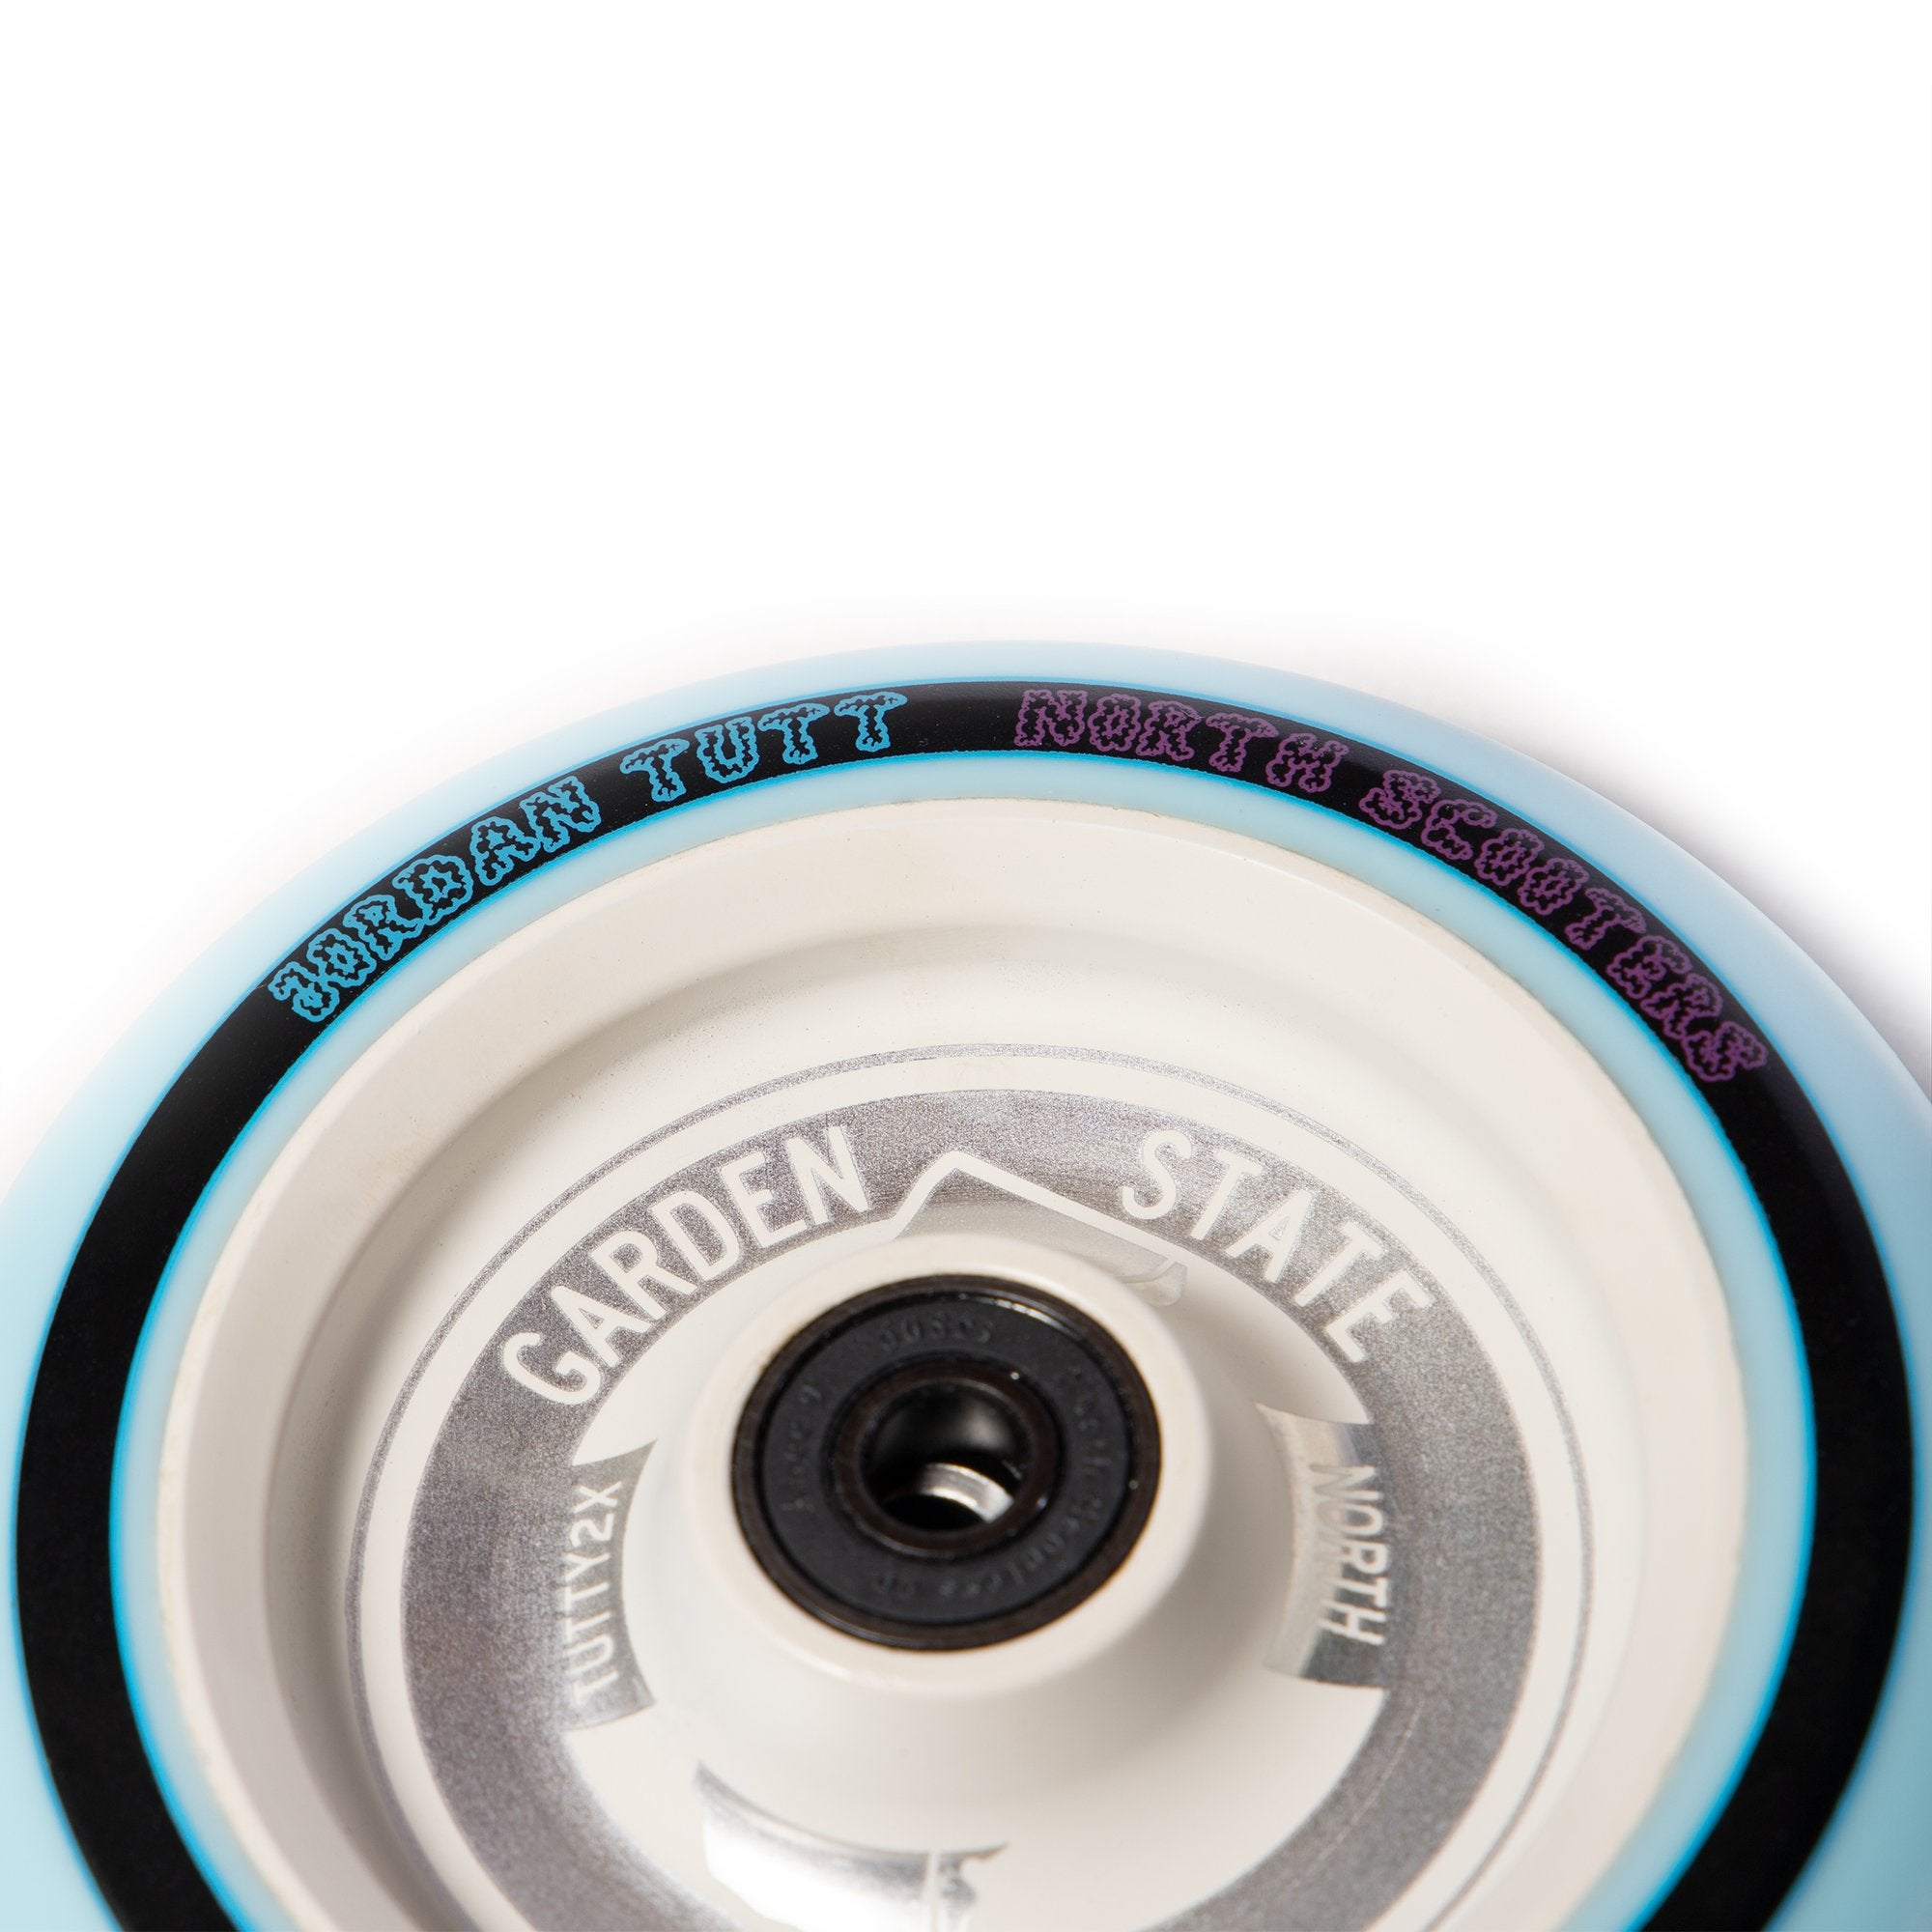 North Scooters Jordan Tutt Signature 110X24mm (PAIR) - Scooter Wheels Close Up Garden State